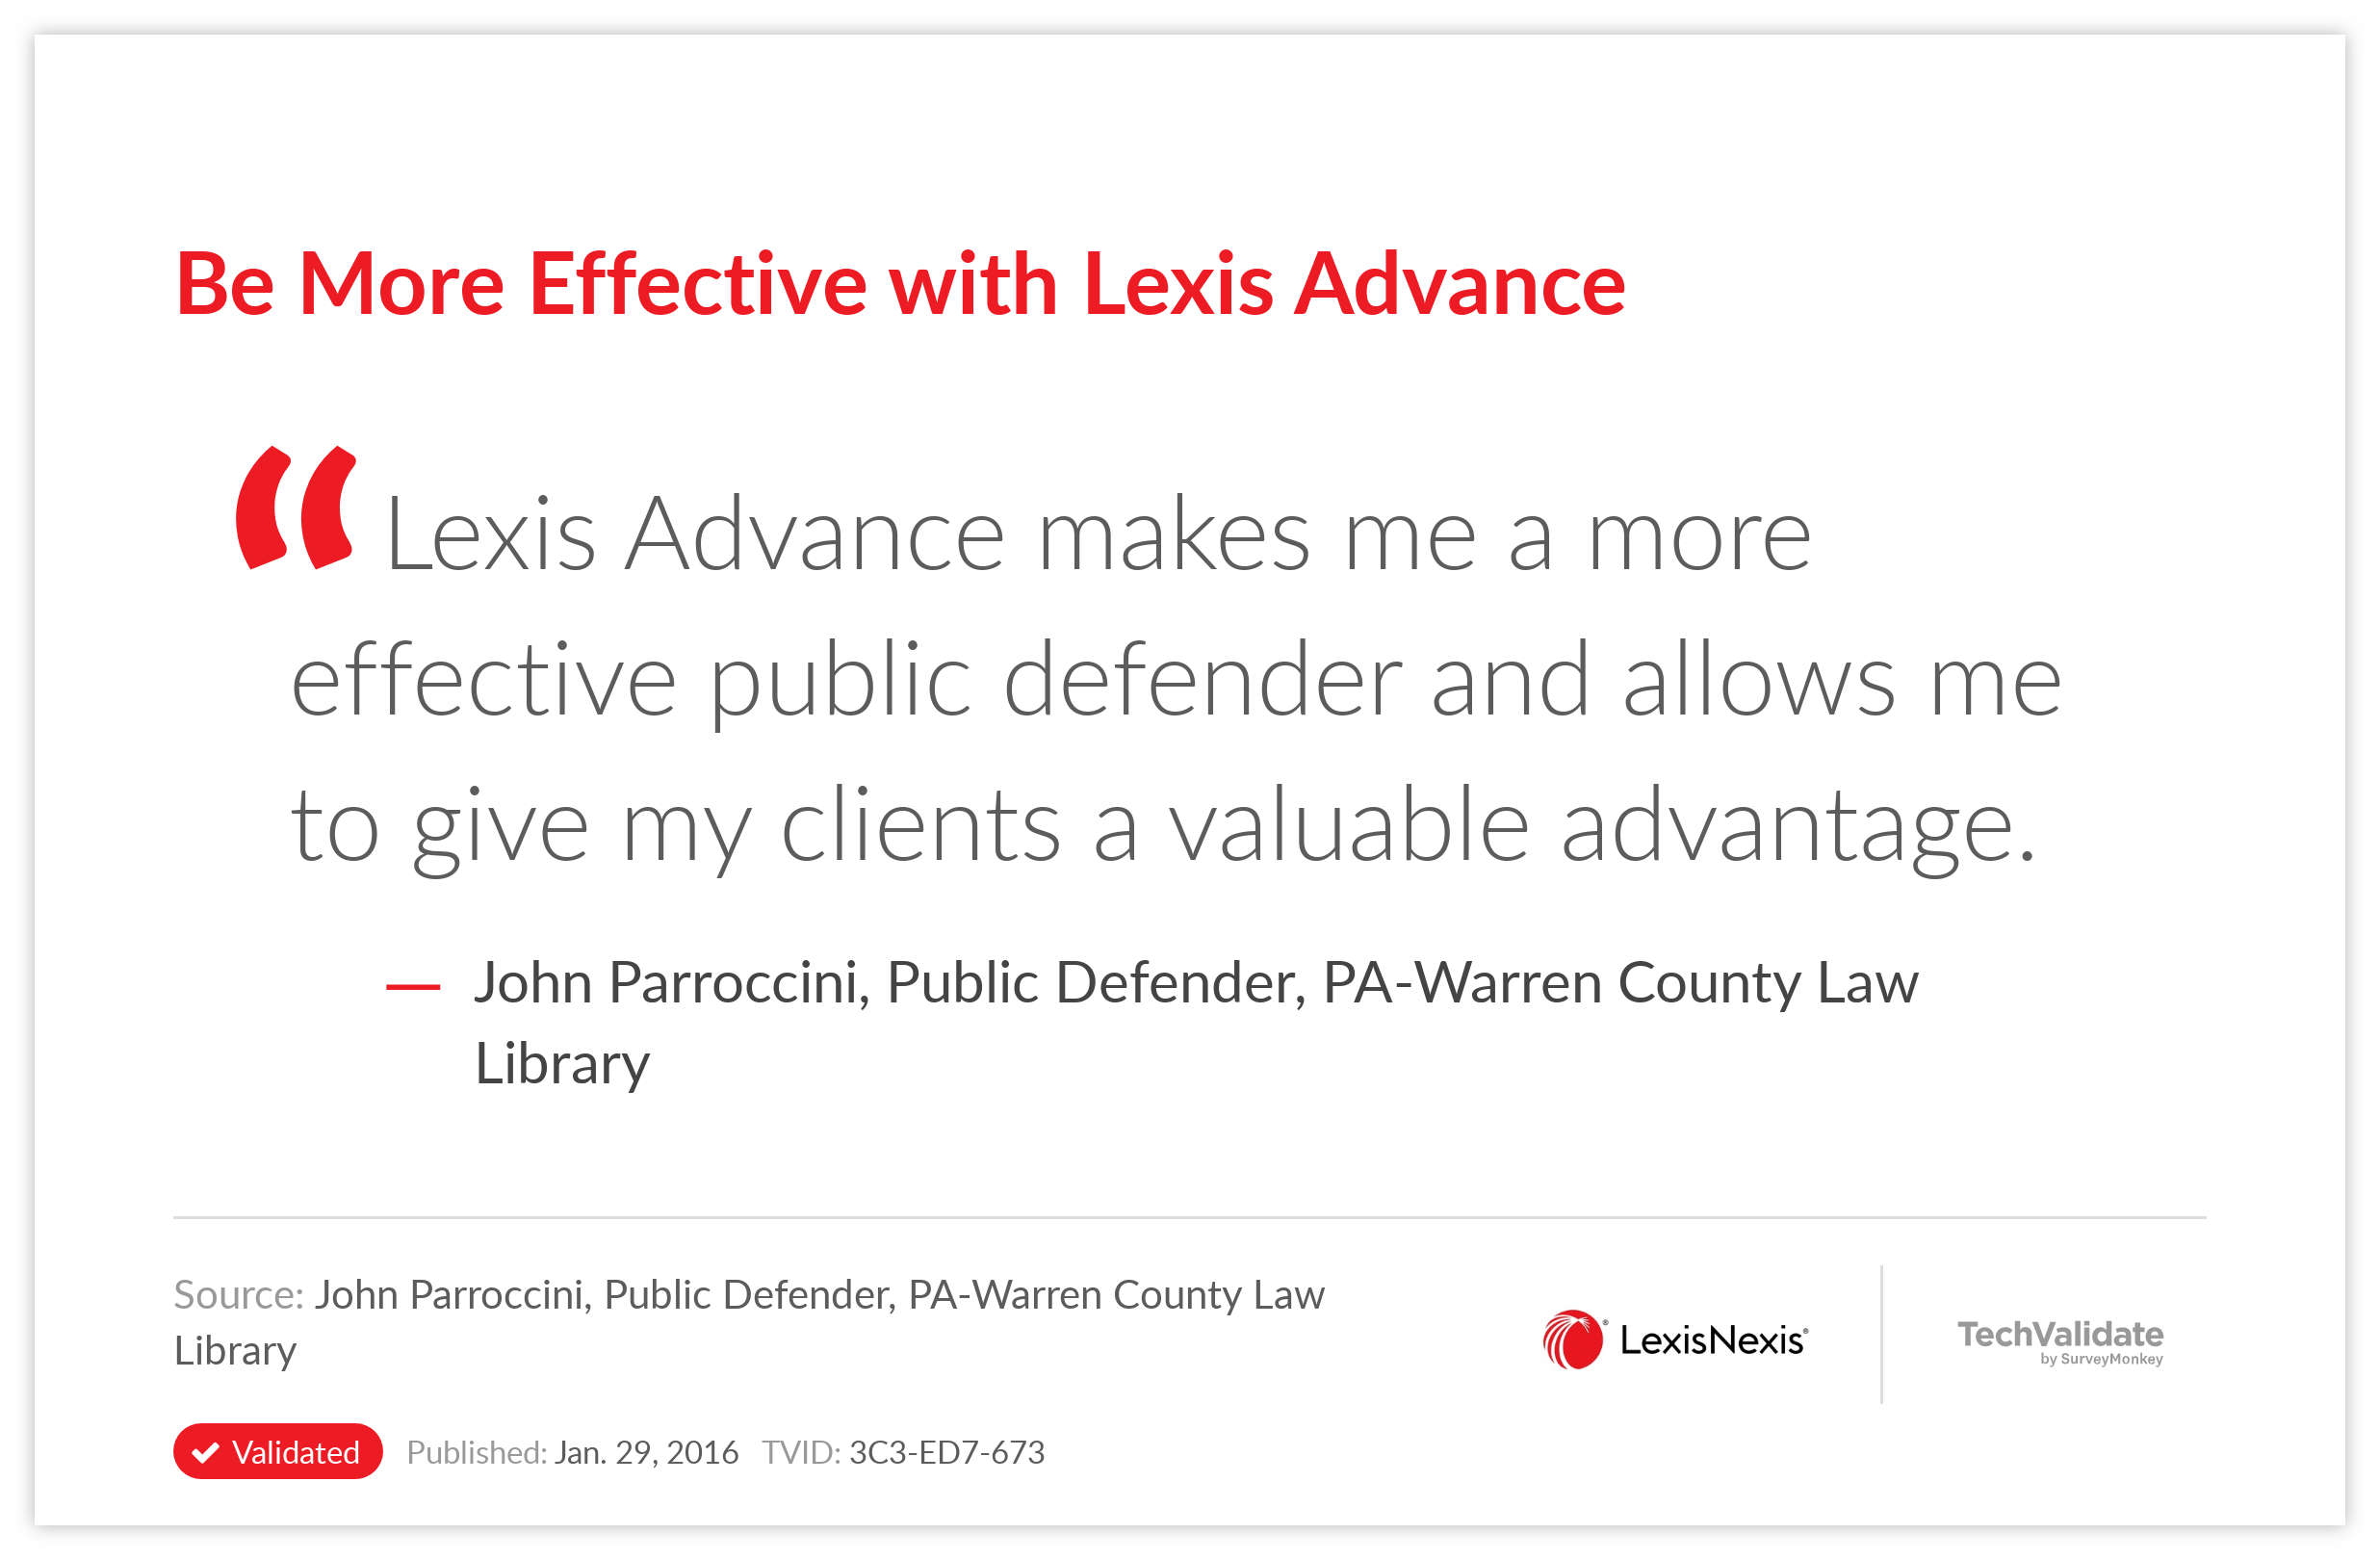 Be More Effective with Lexis Advance